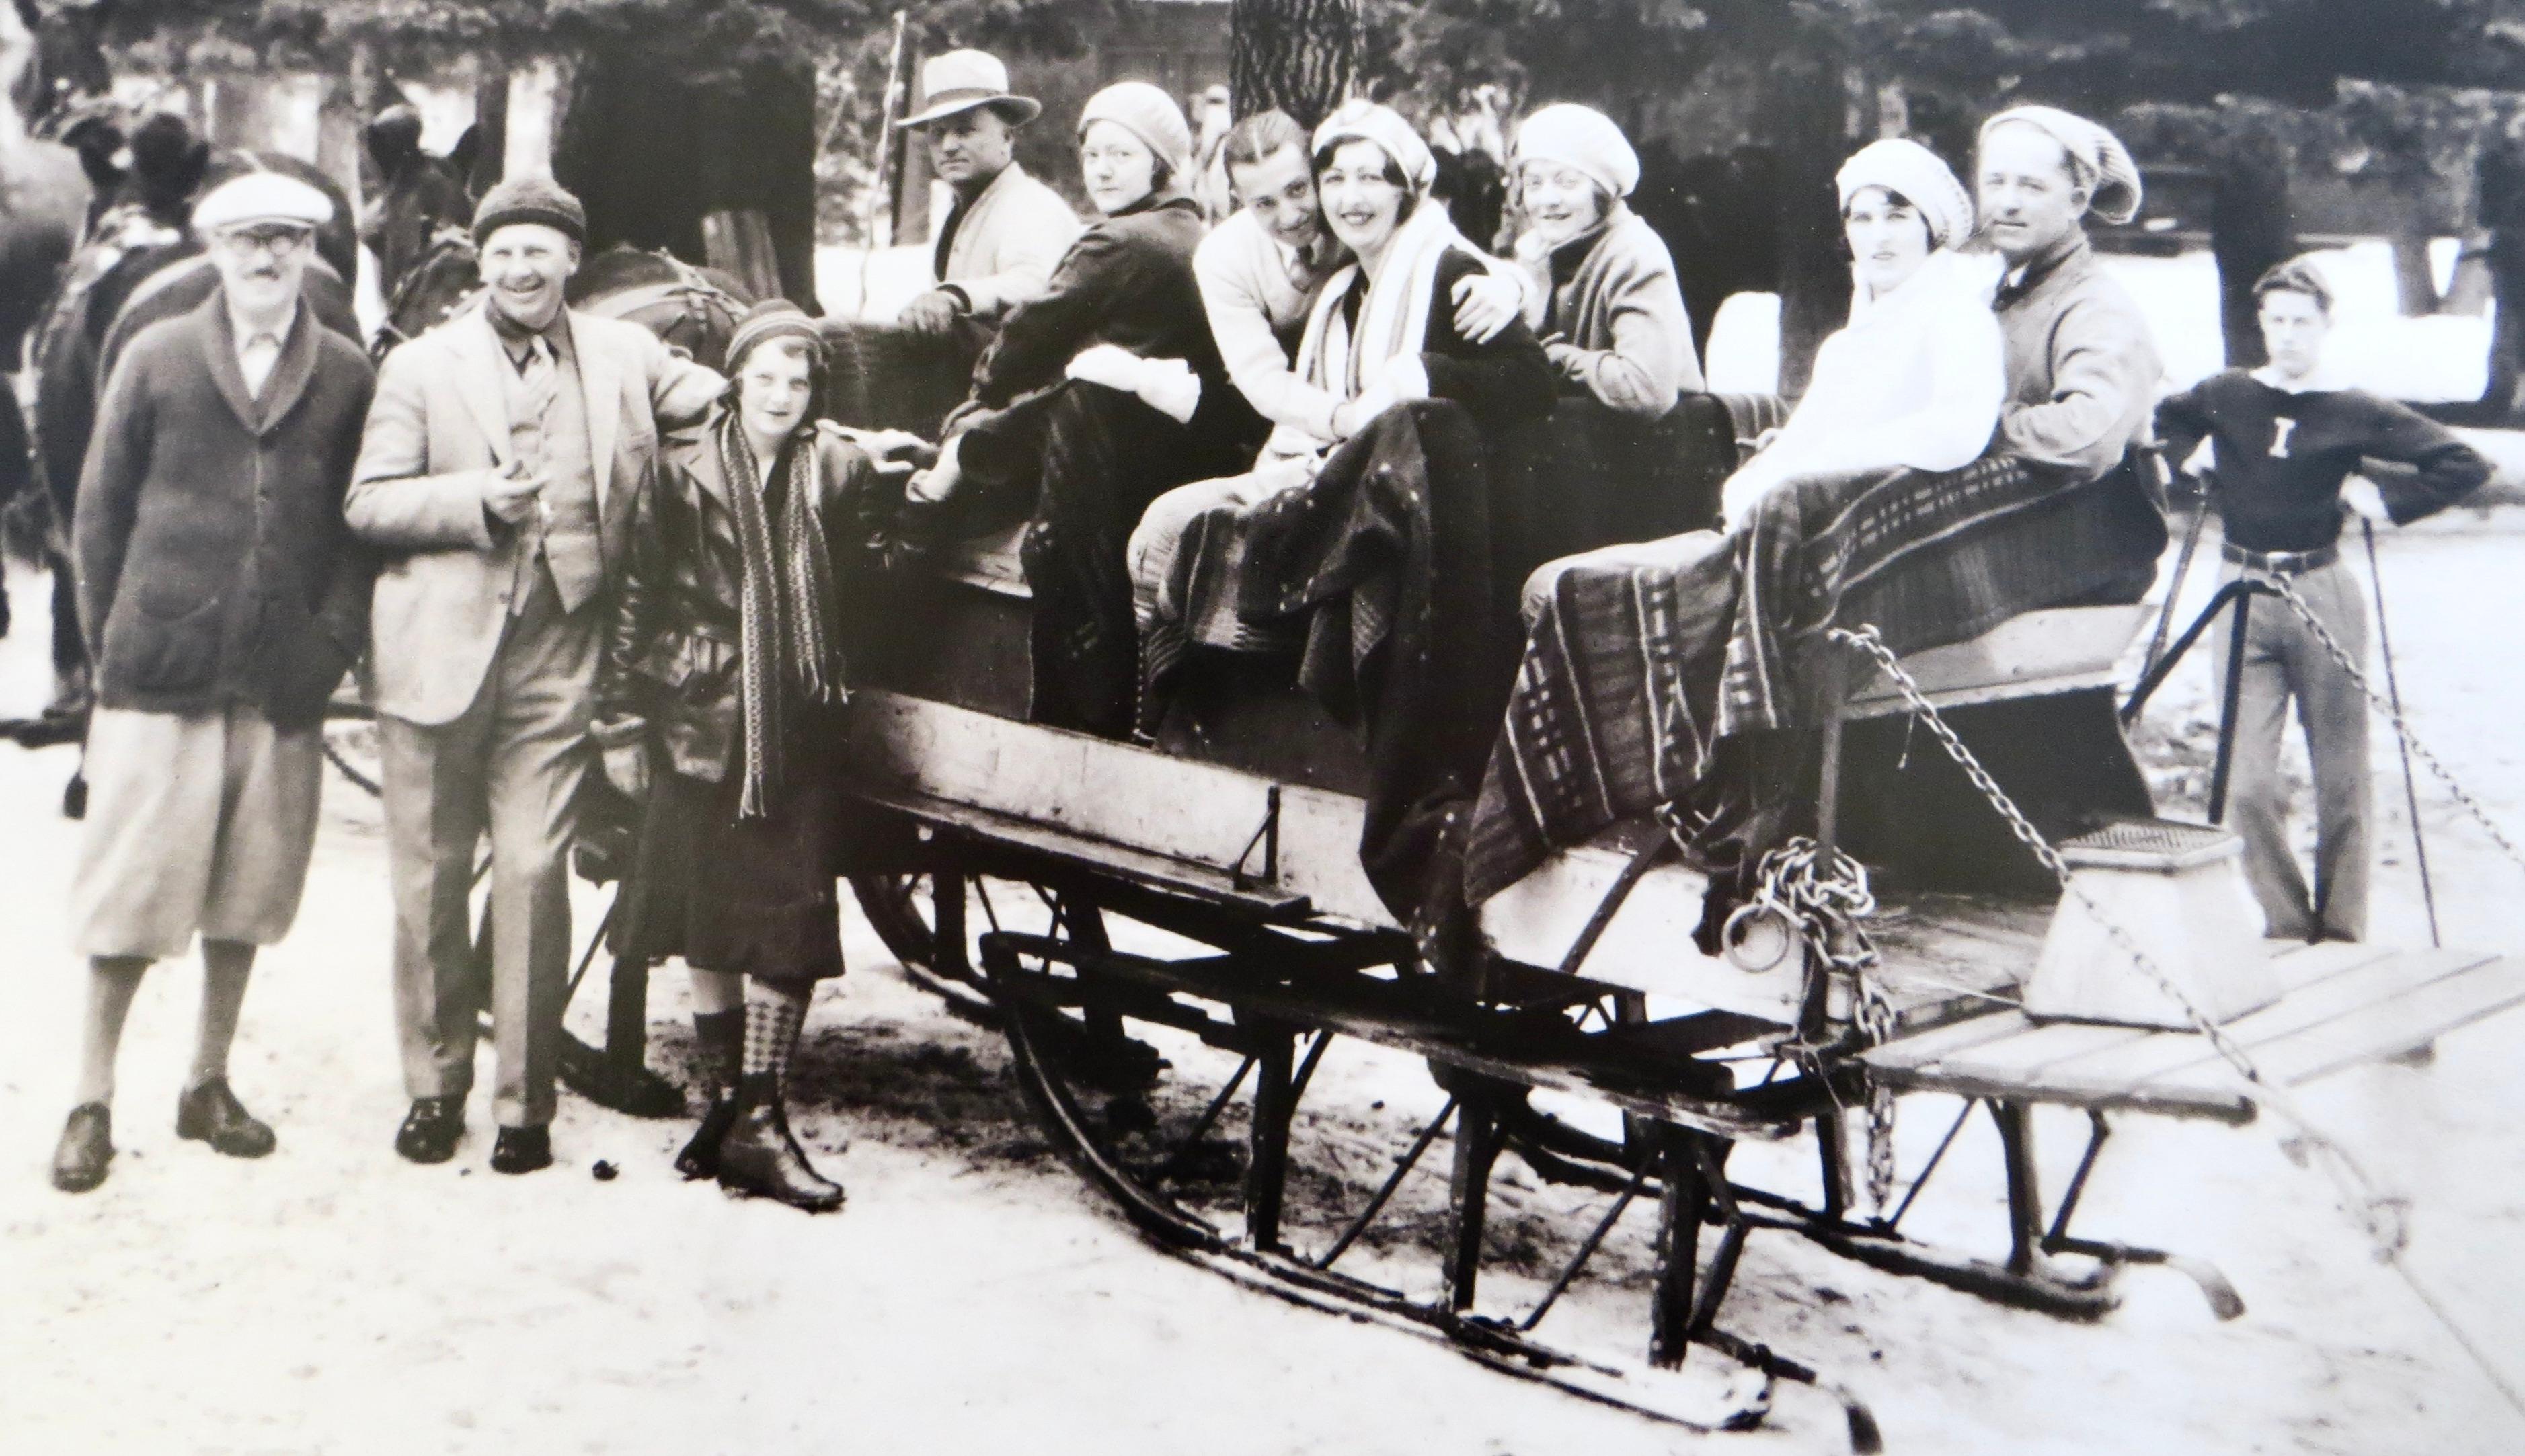 Vintage Lake Tahoe Area Photograph, dated 1931, of a large group of 9 or 10  people sledding in a beautiful double horse drawn luxury sleigh, during a winter's day. People are dressed in period winter clothing and ready for a lovely afternoon